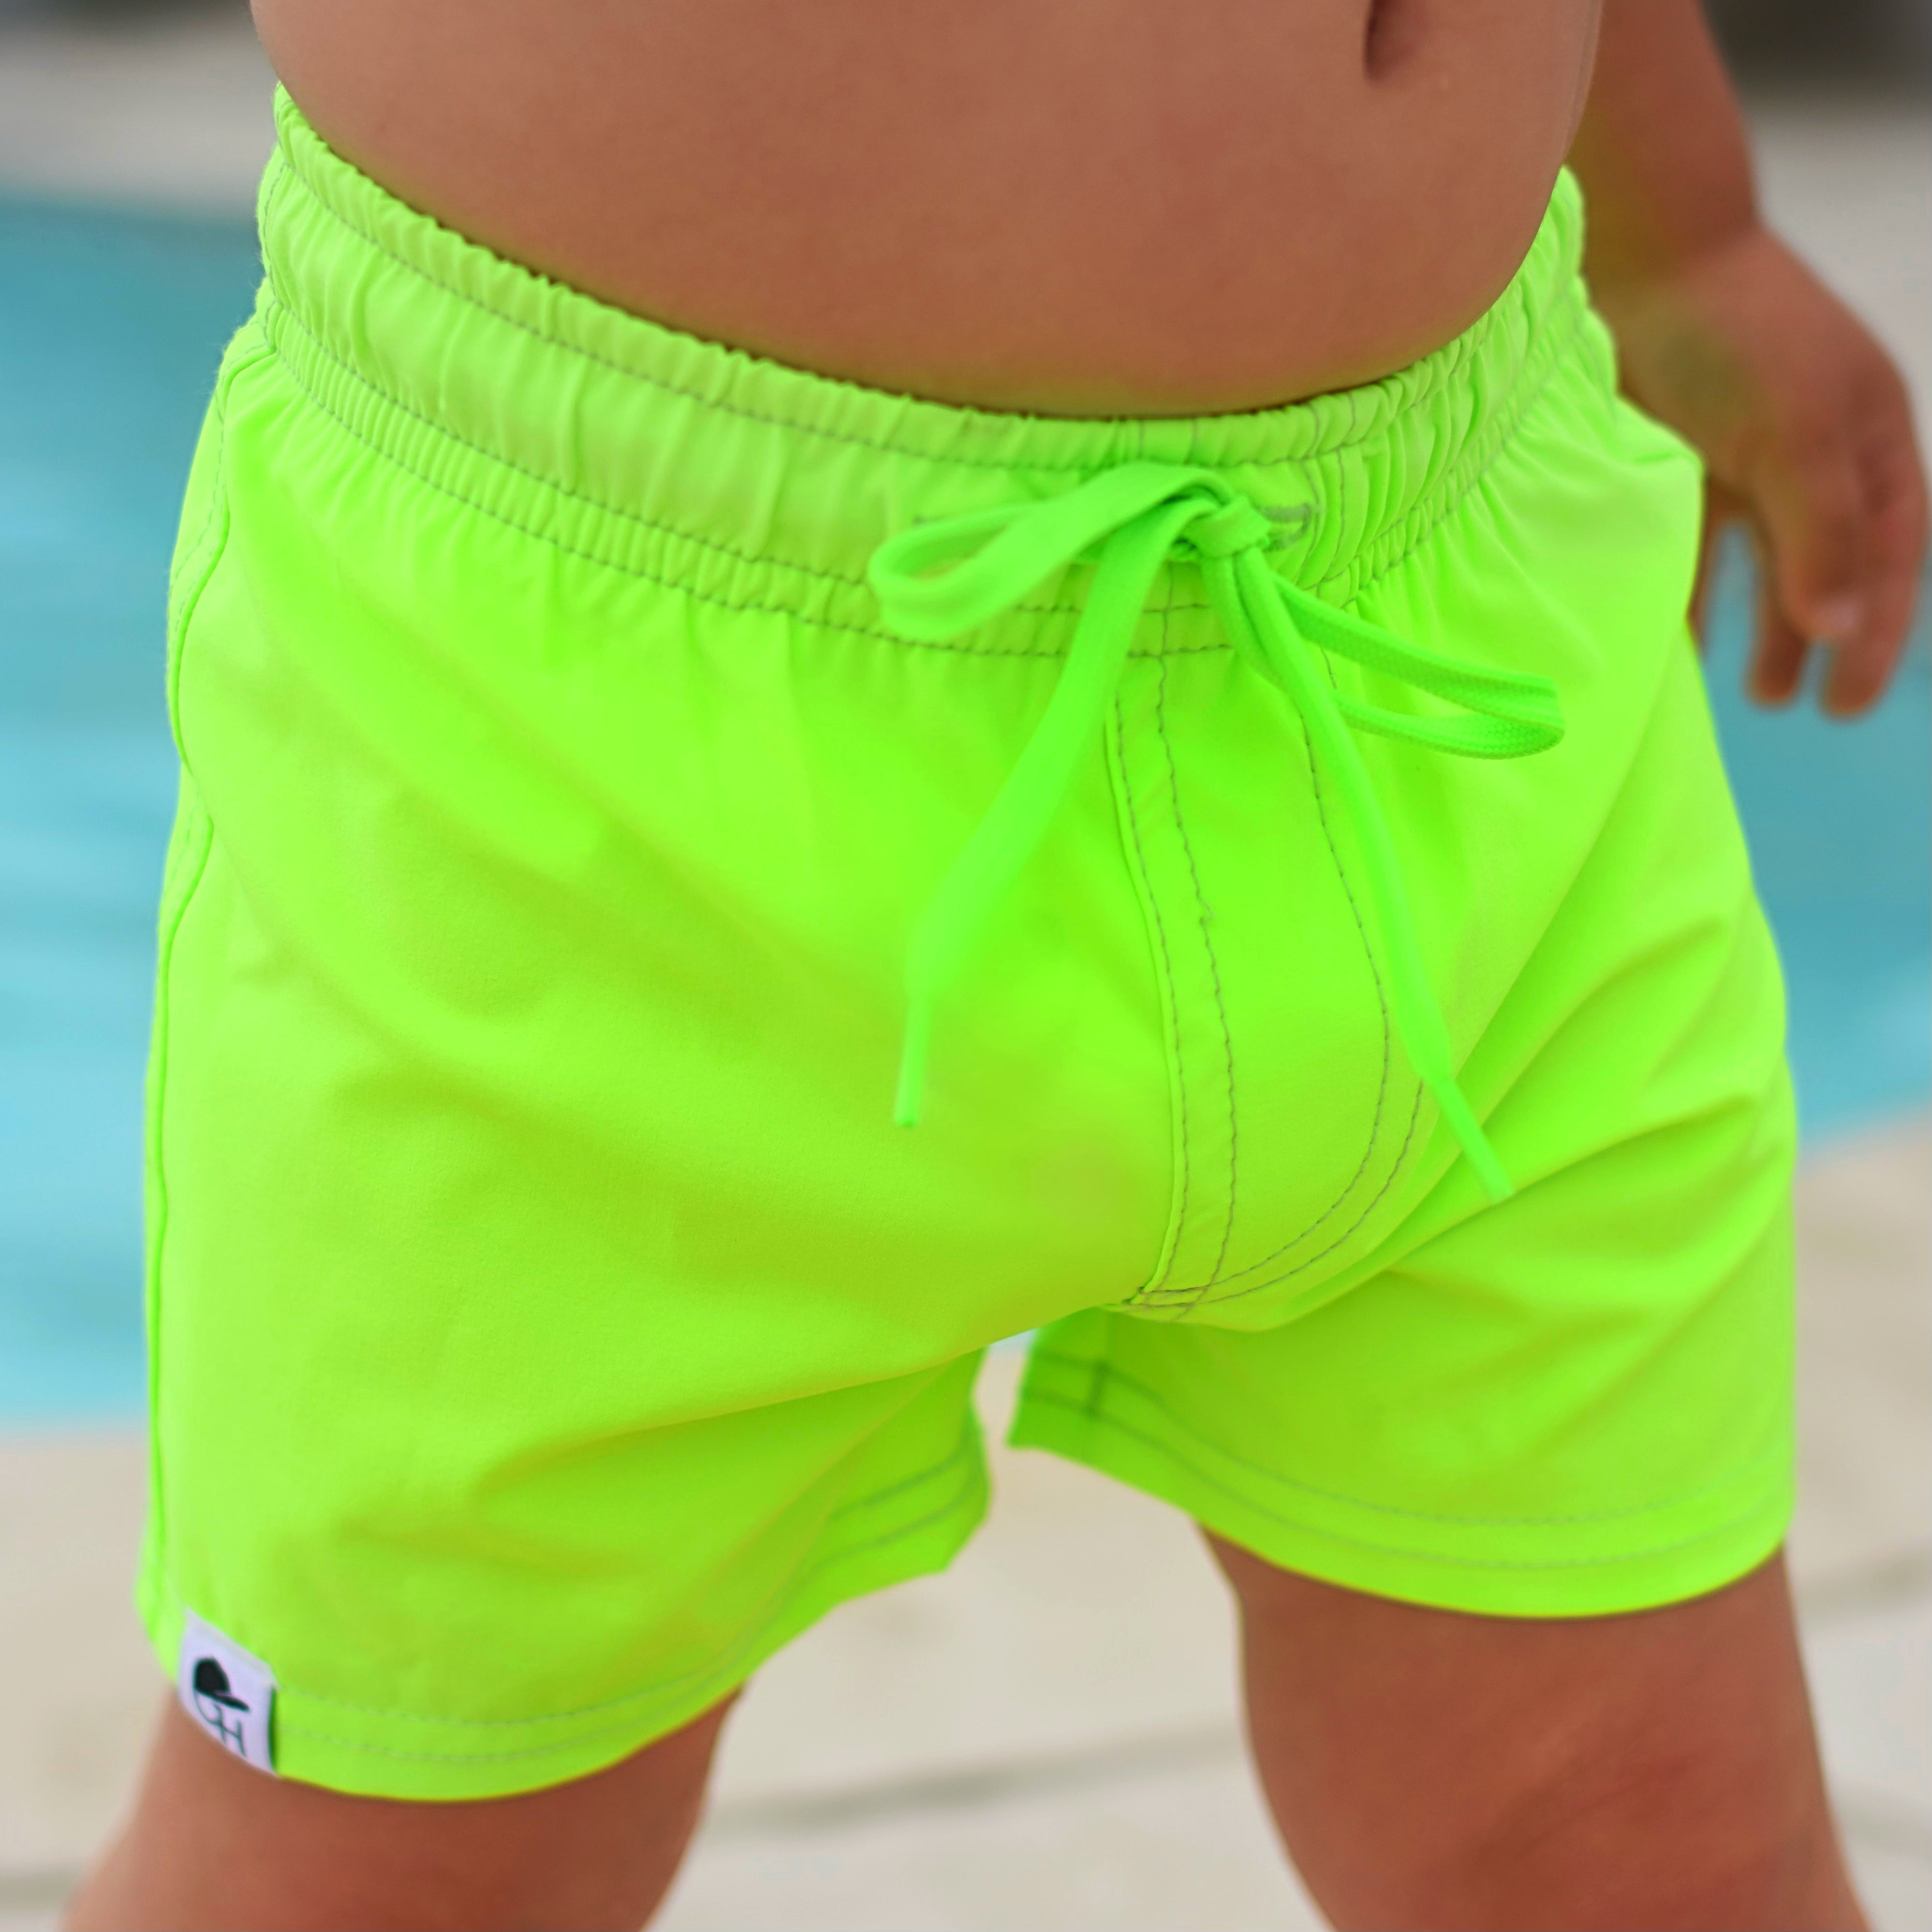 Neon Green Swim Shorts from George Hats